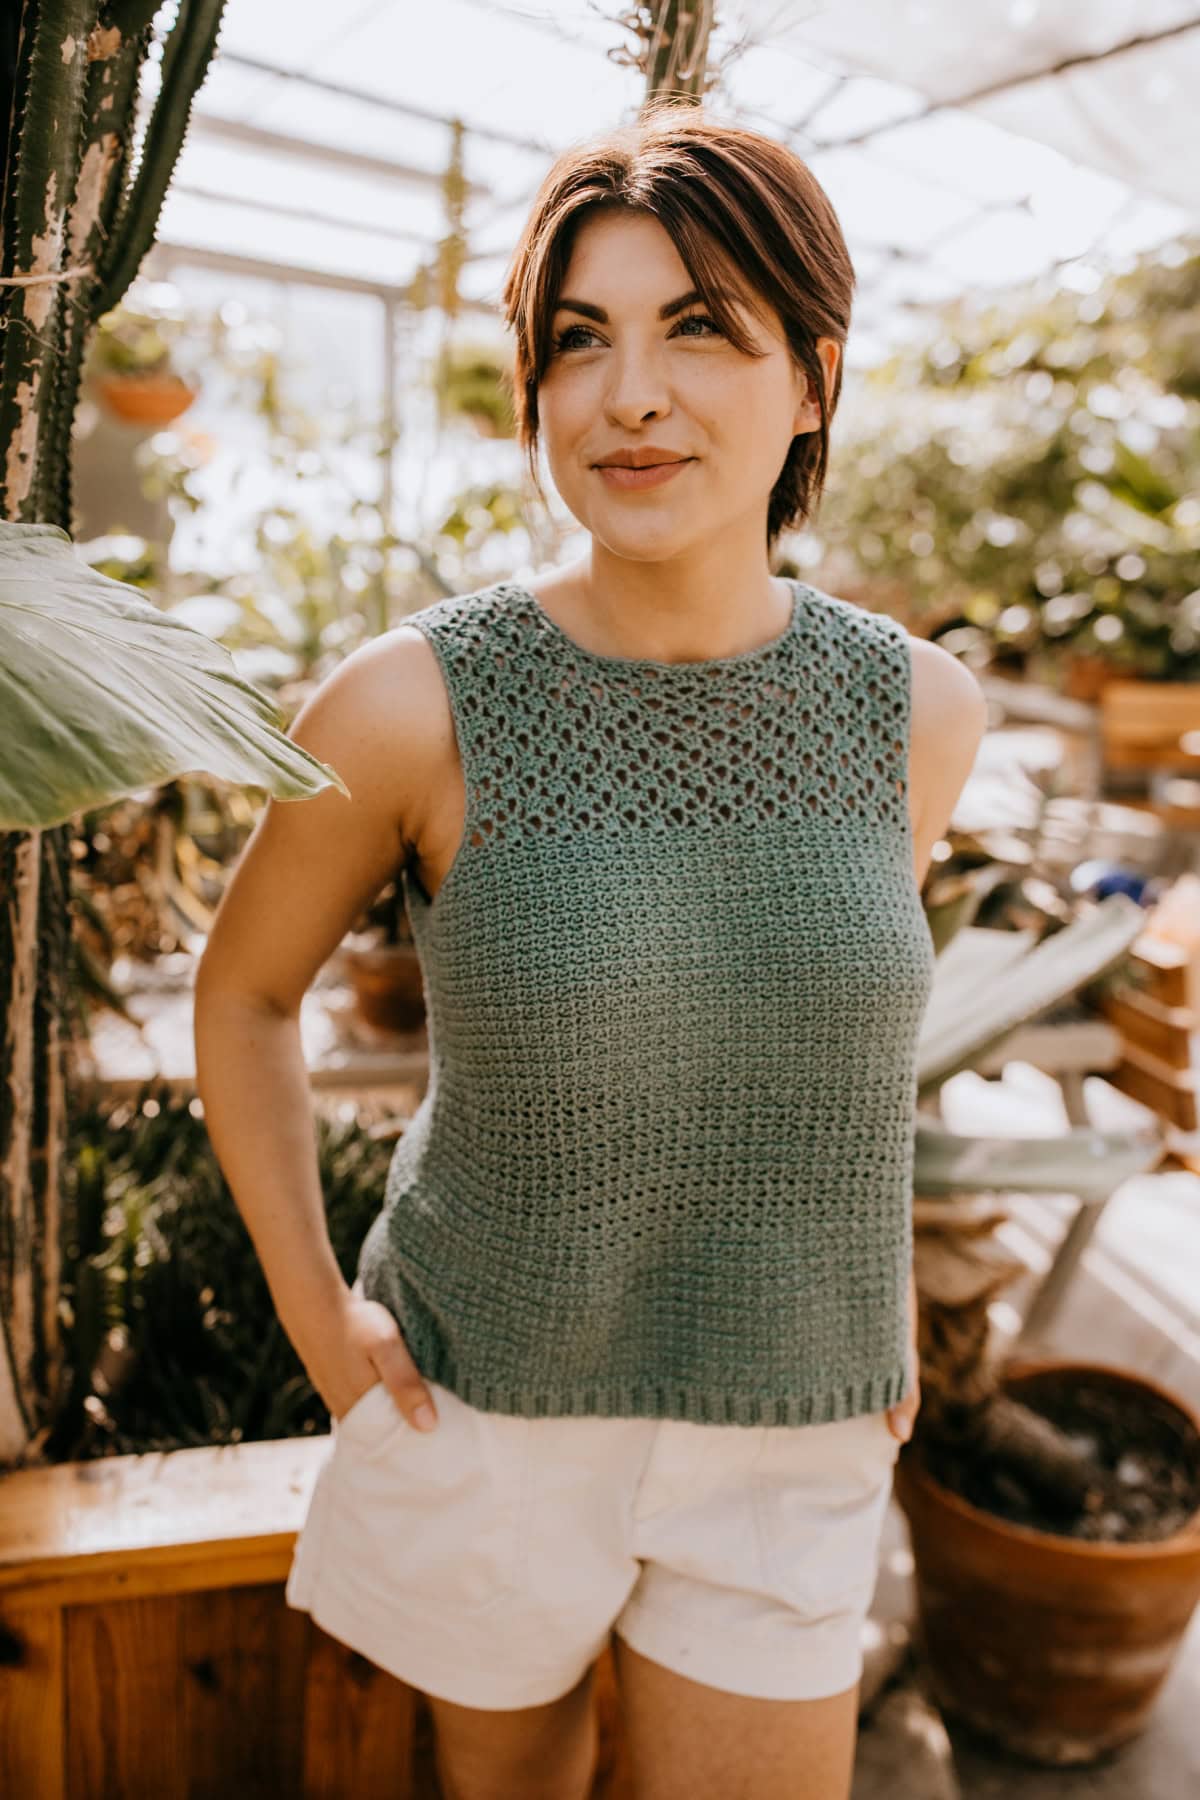 A woman wearing a crochet summer top standing with a hand in her pocket.